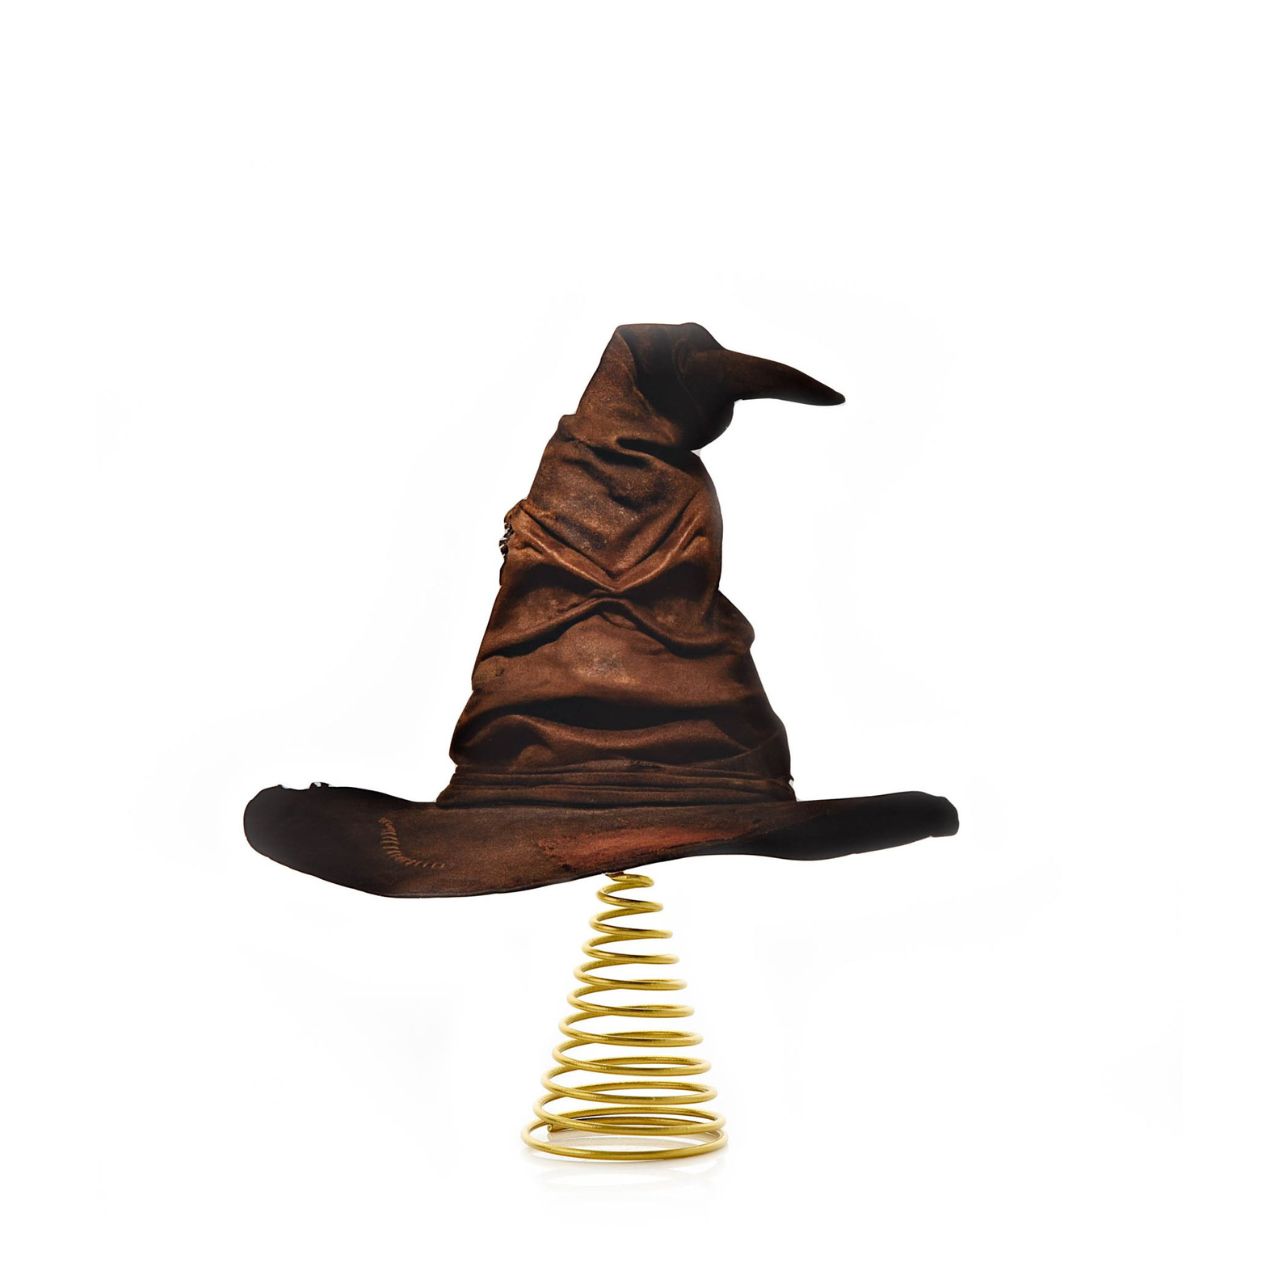 Harry Potter Tree Topper - Sorting Hat  Add some character to the top of your tree this year by welcoming the sorting hat into your festive season. A perfectly magical gift for any Harry Potter fans in your life.